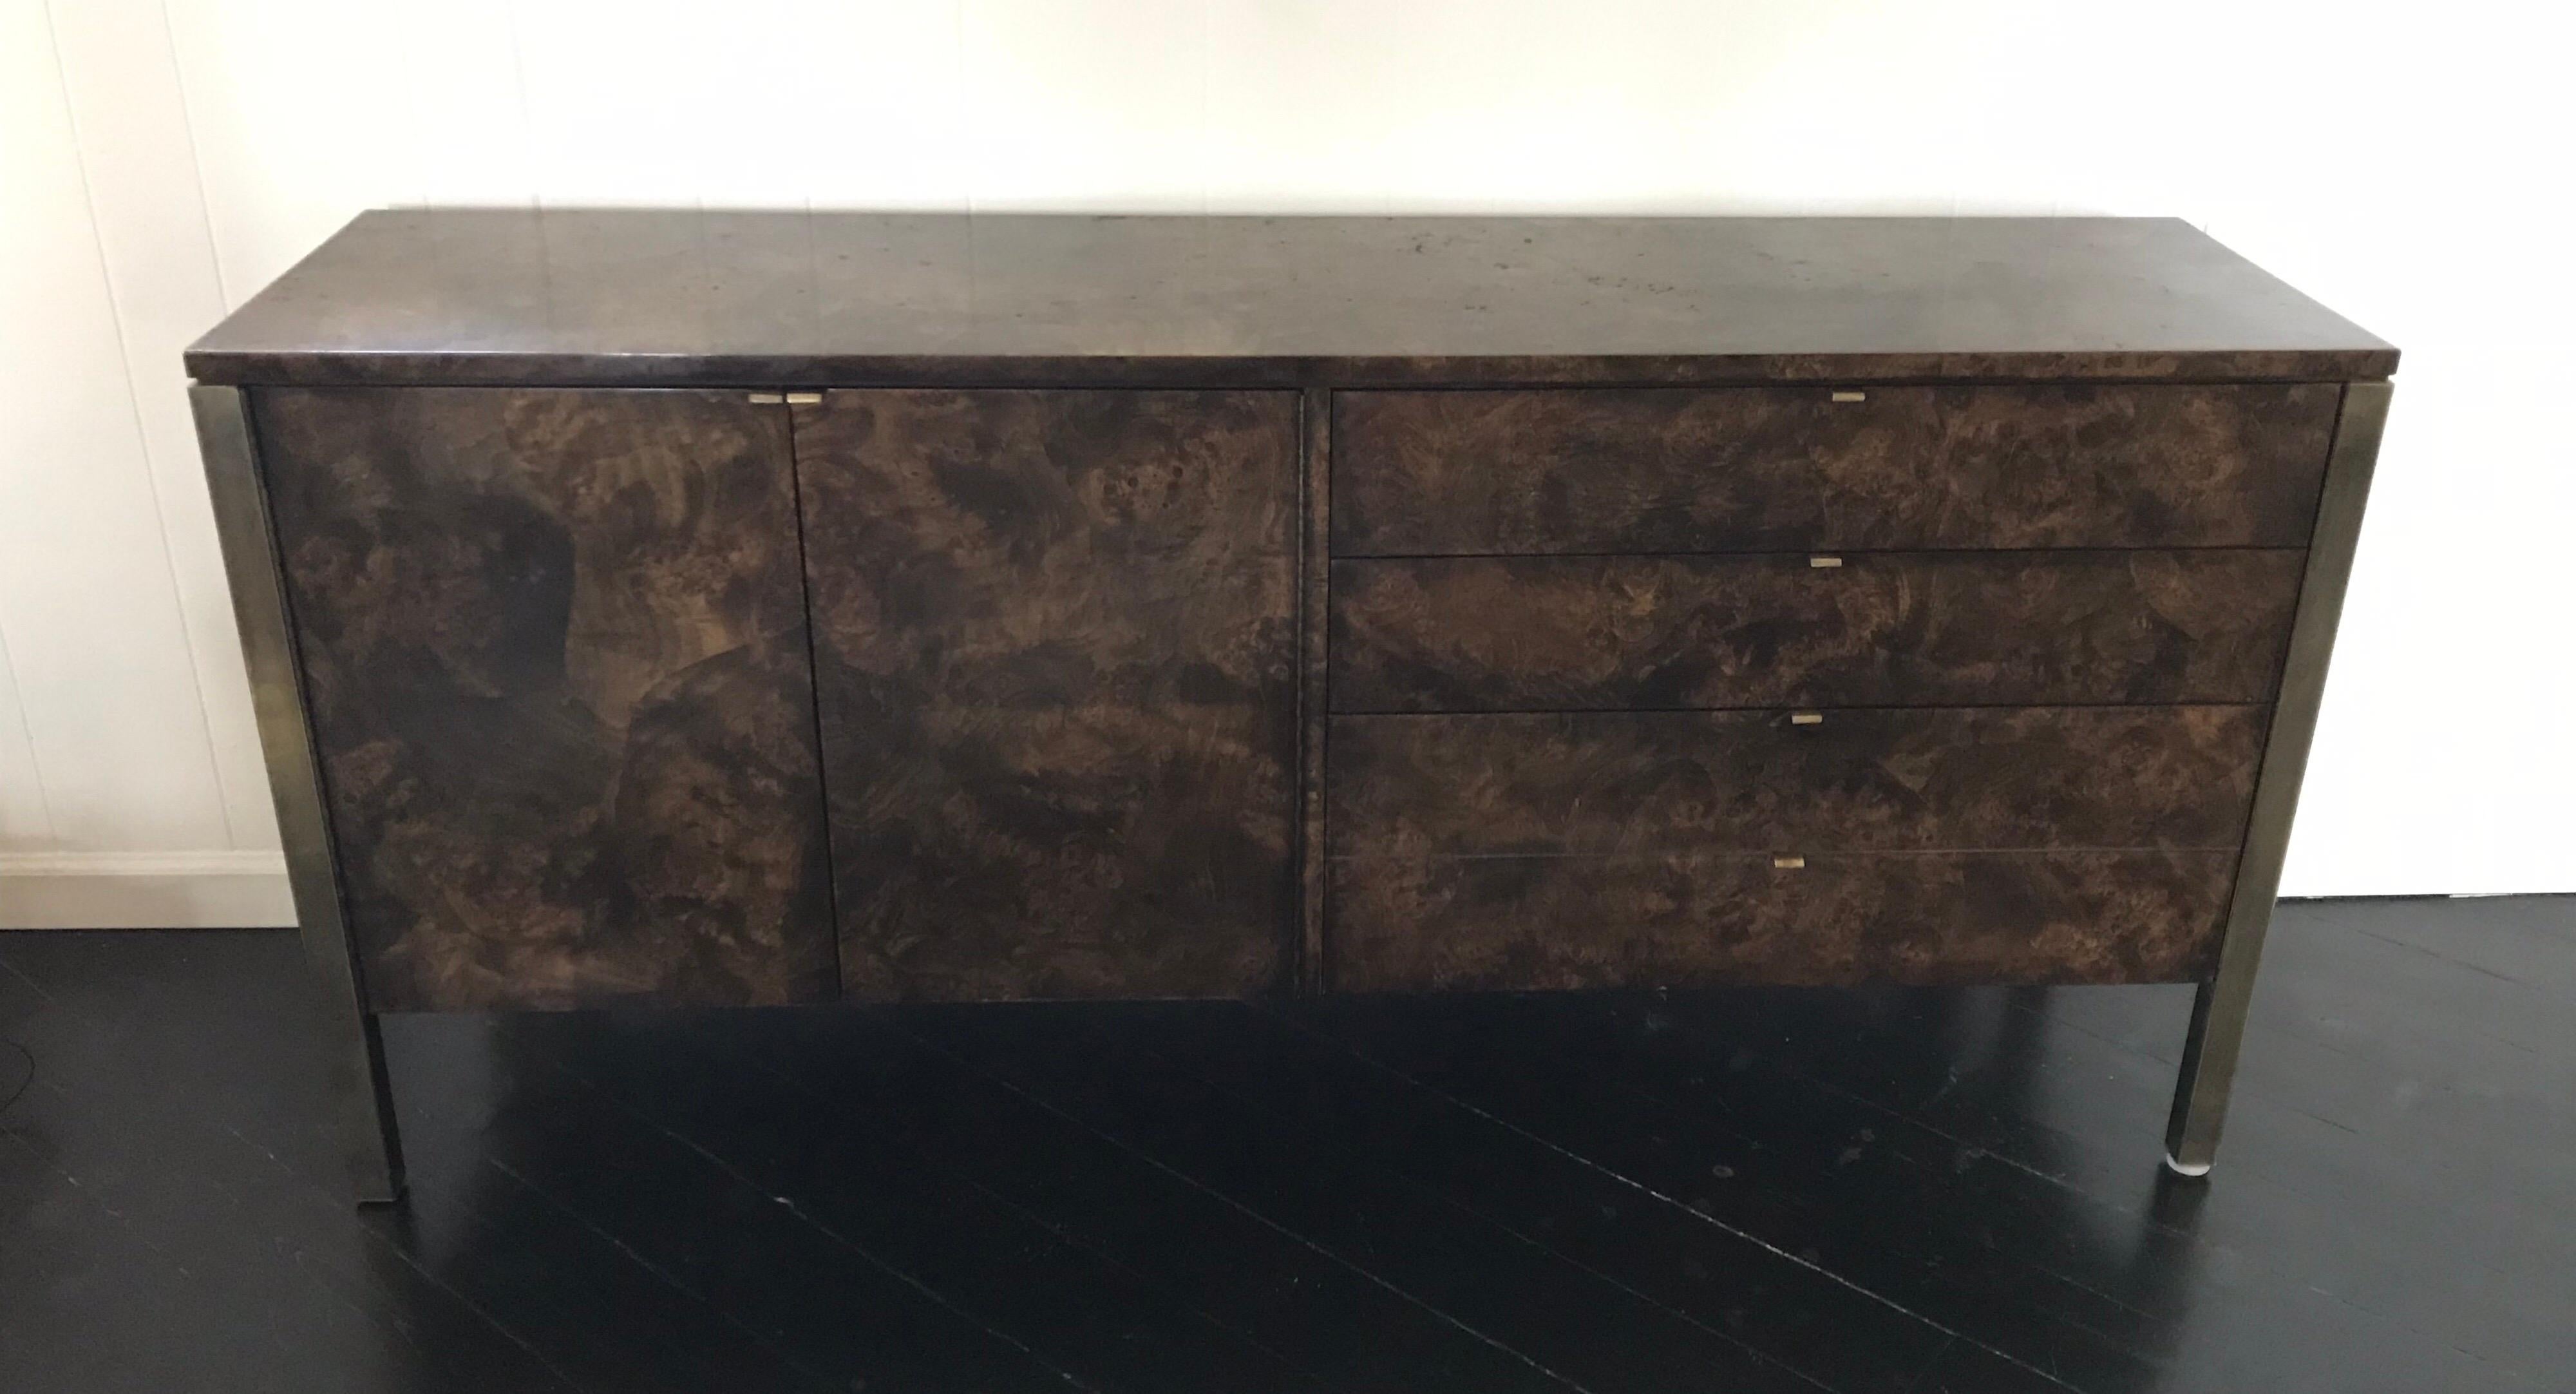 Beautiful patchwork burled walnut credenza or sideboard by Tomlinson. Rich dark mocha brown coloring. Clean lines with brass pulls and aged brass patina legs, circa 1960s.